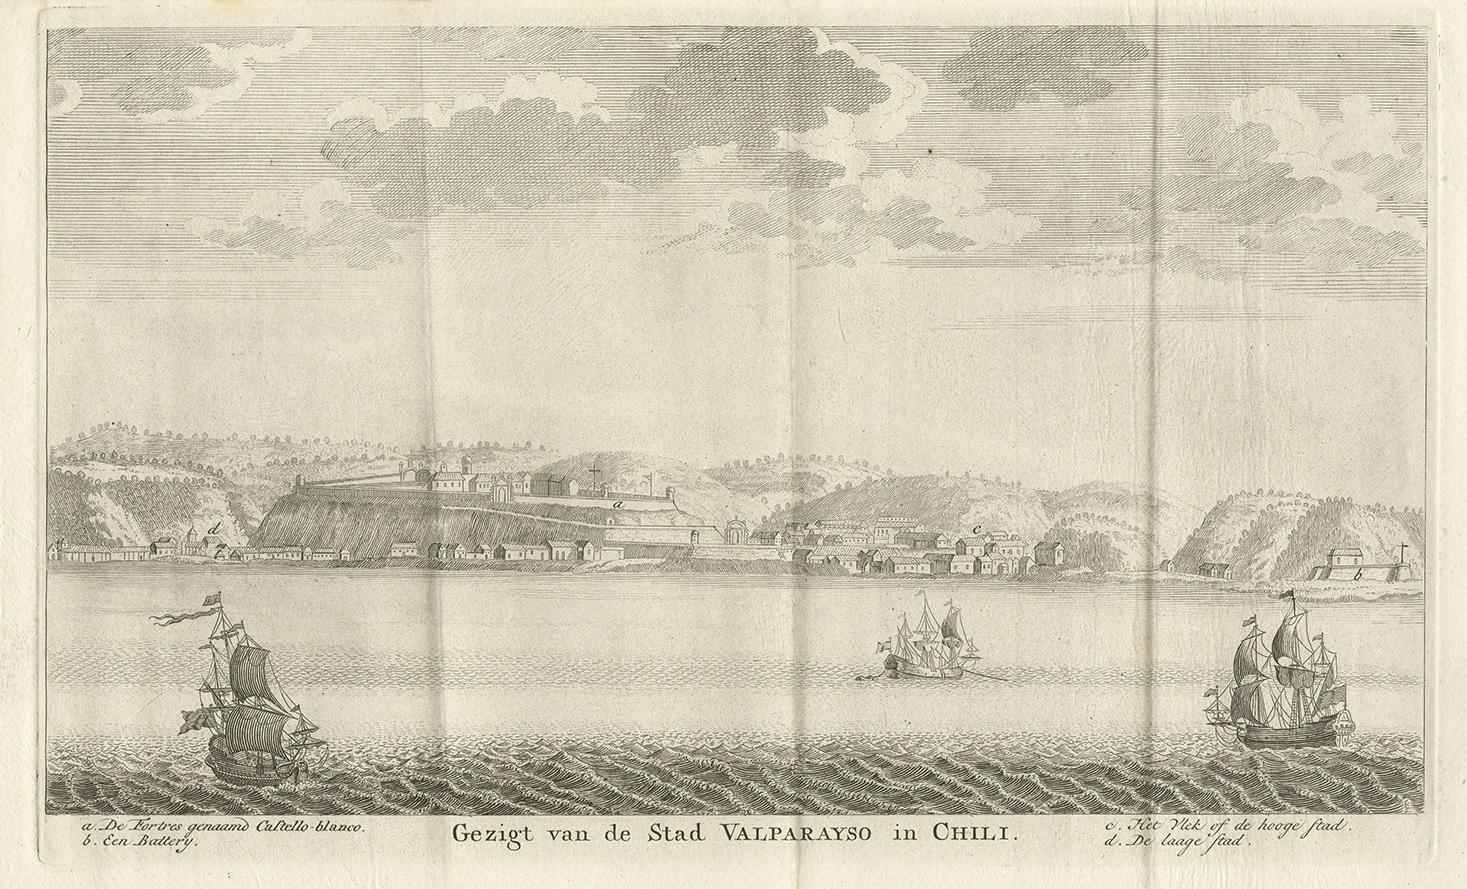 Antique print titled 'Gezigt van de Stad Valparayso in Chili'. Detailed view of the city and port of Valparaíso, Chile. With Dutch key. As indicated by the presence of the fort and battery, Valparaíso was a fortified town on the Chilean coast, one